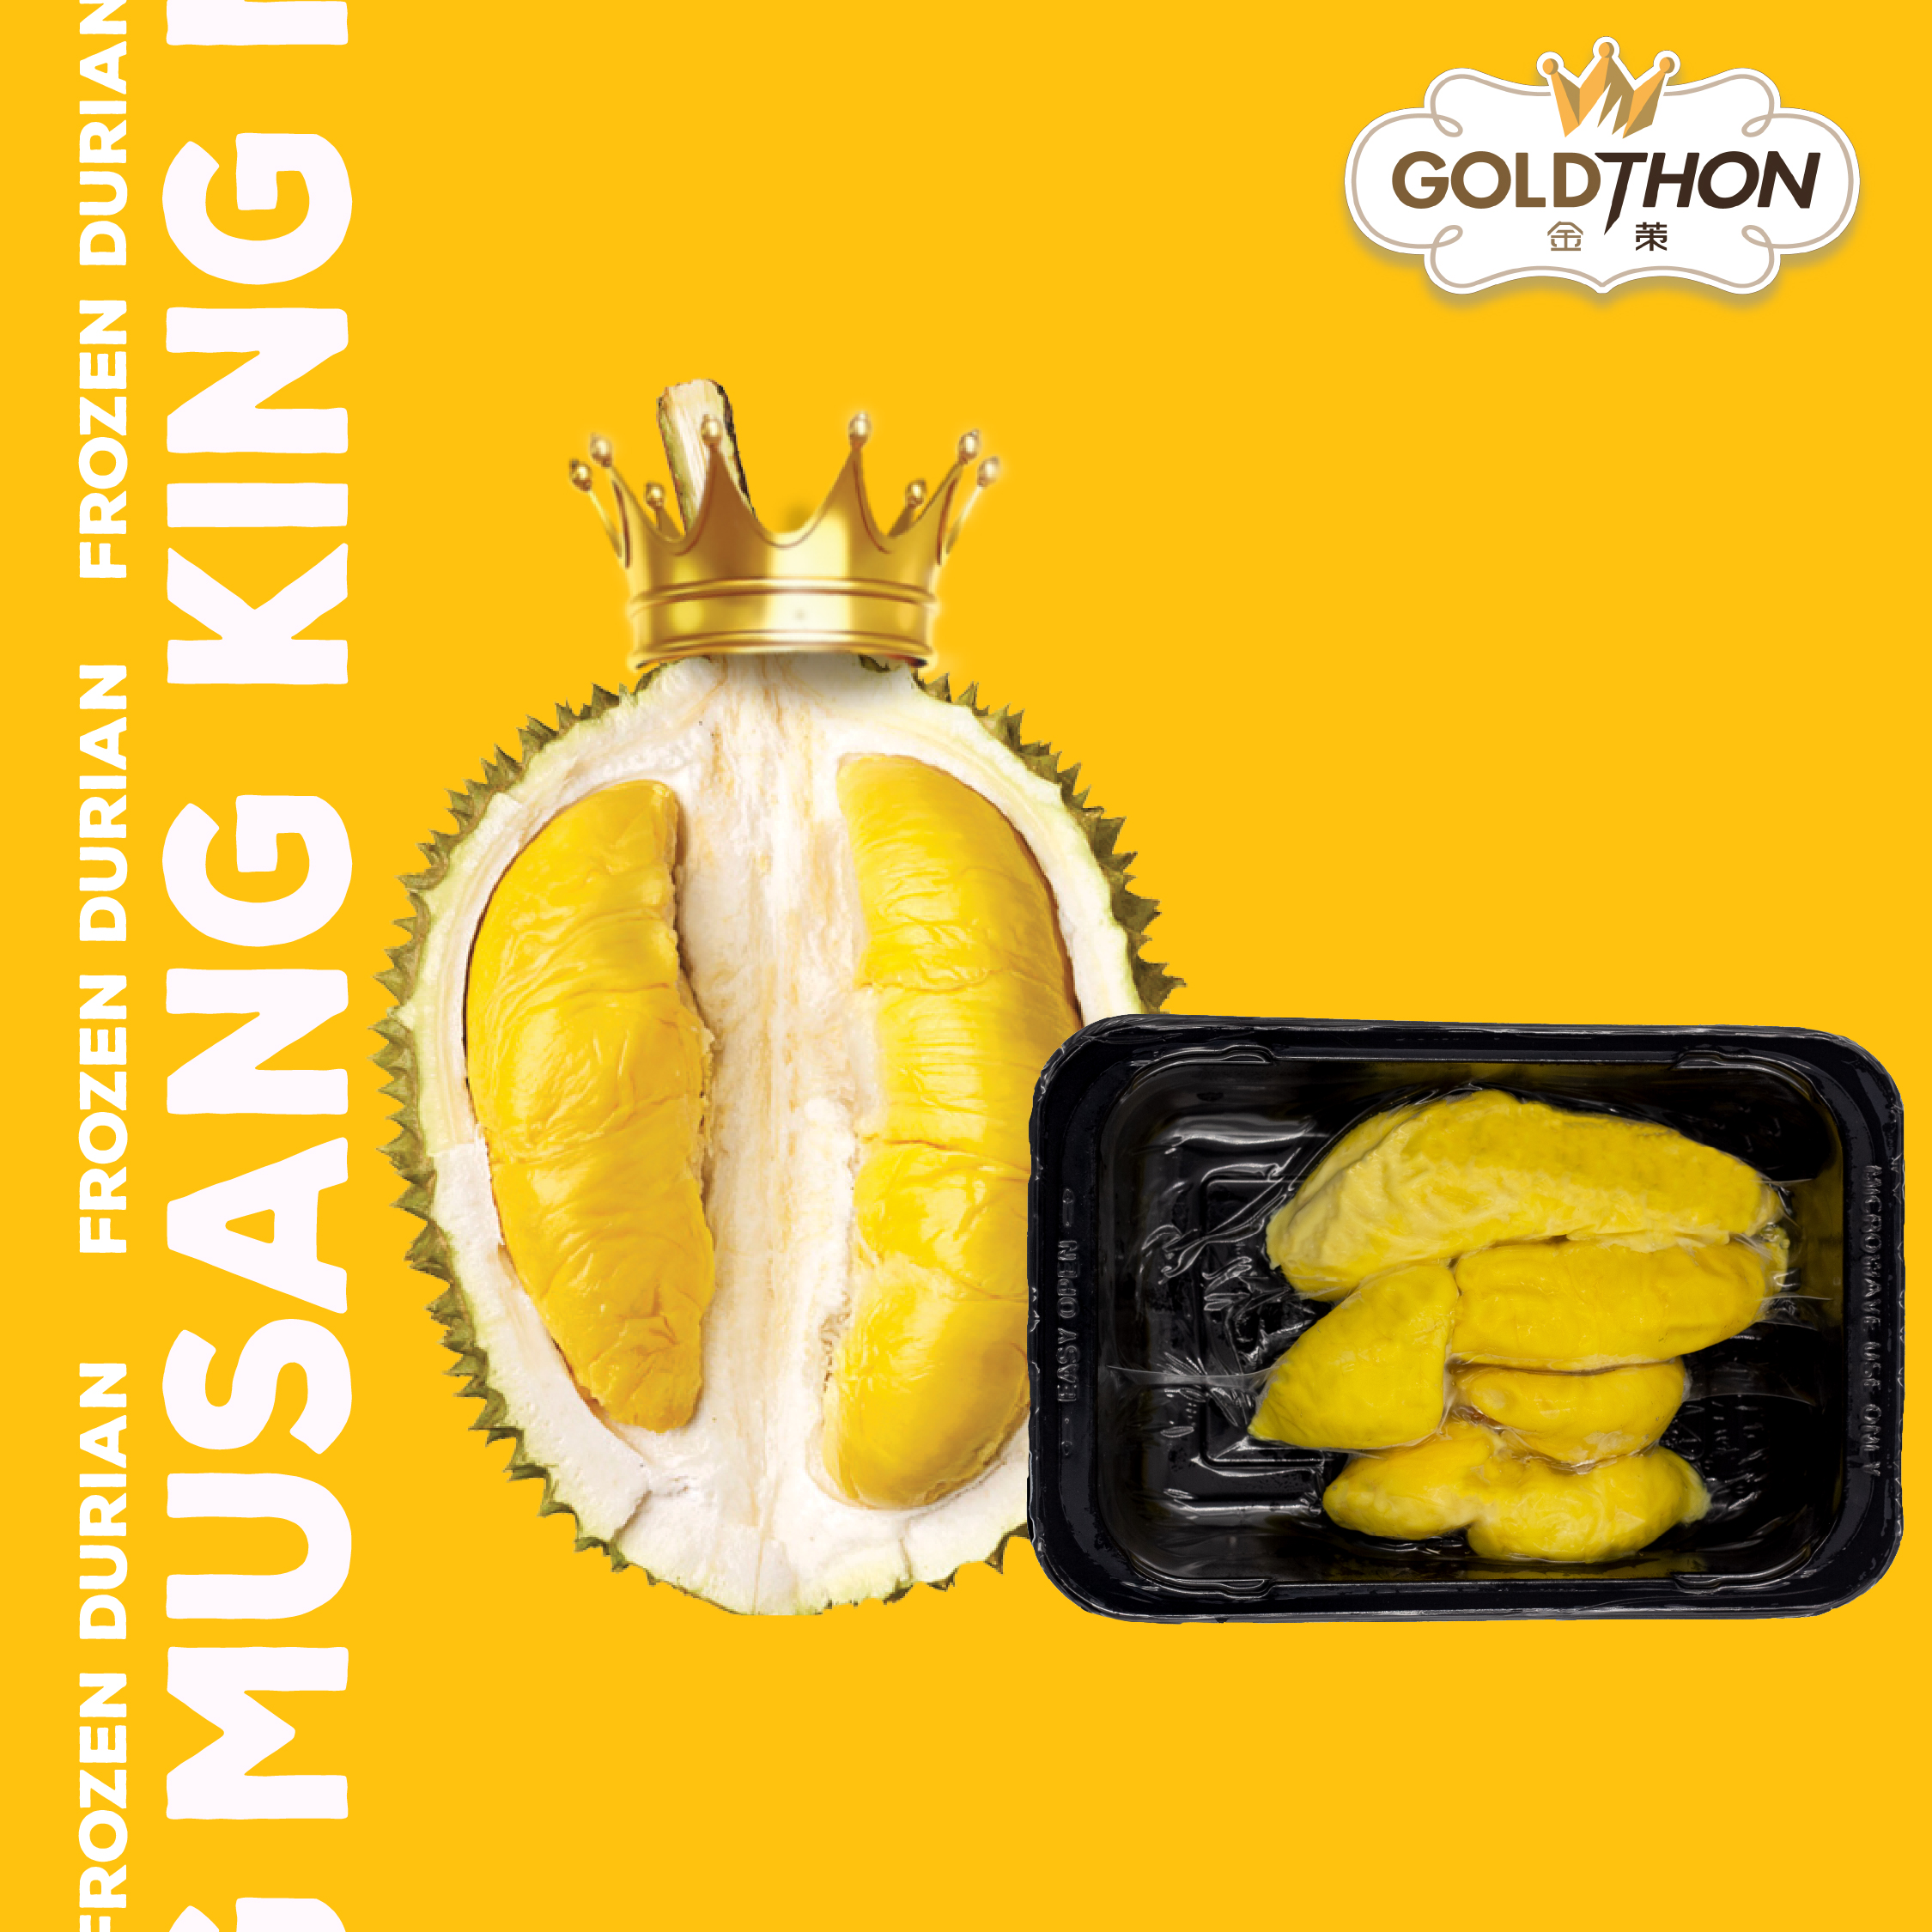 Gold Thon Durian Delivery in West Malaysia